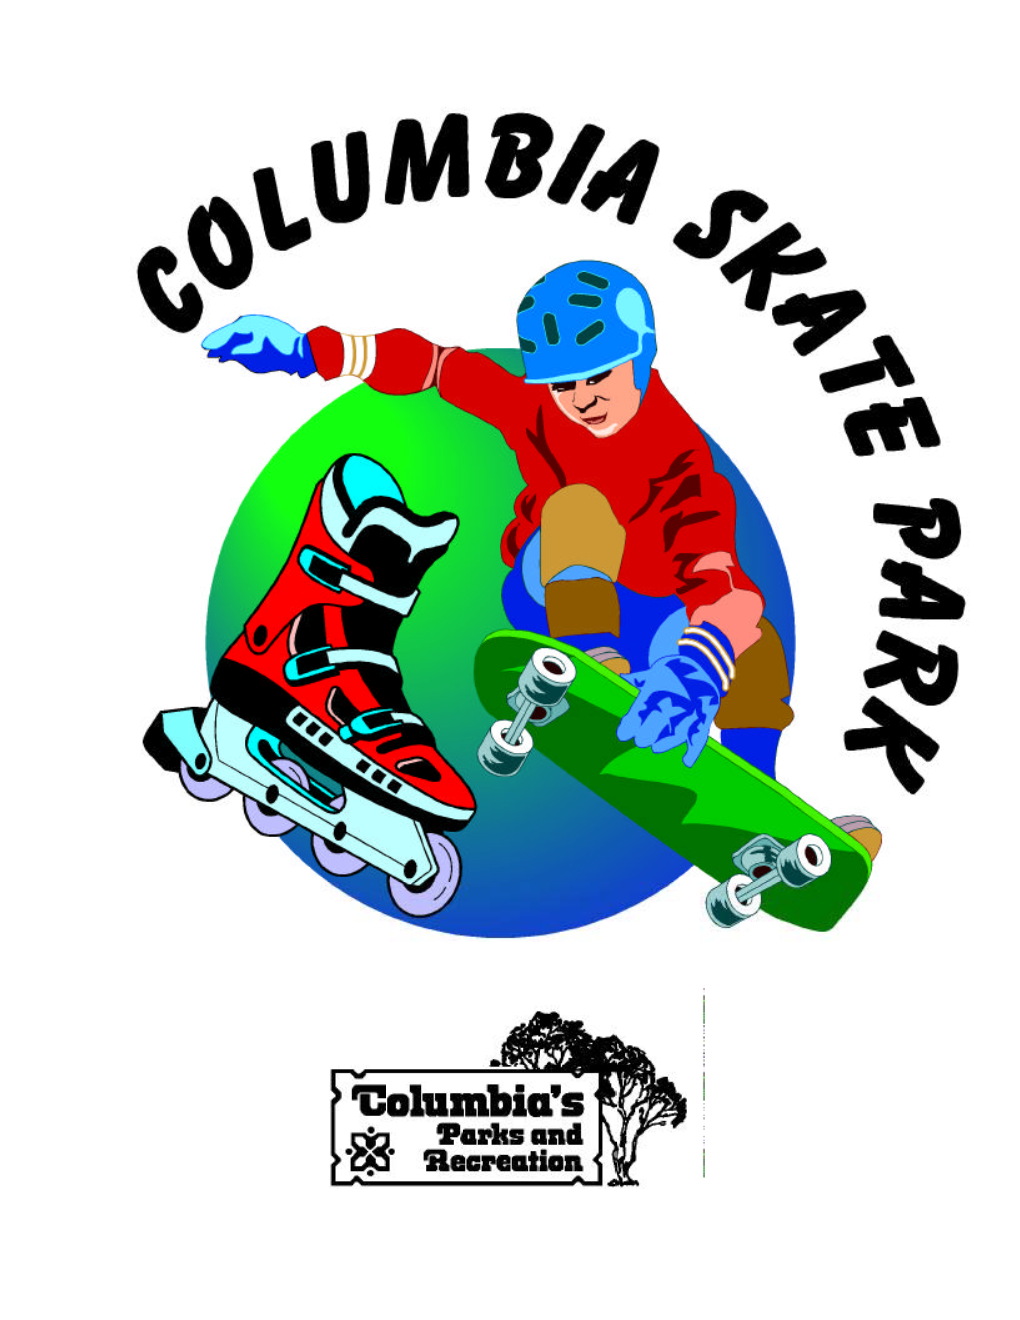 History of Columbia Skate Park